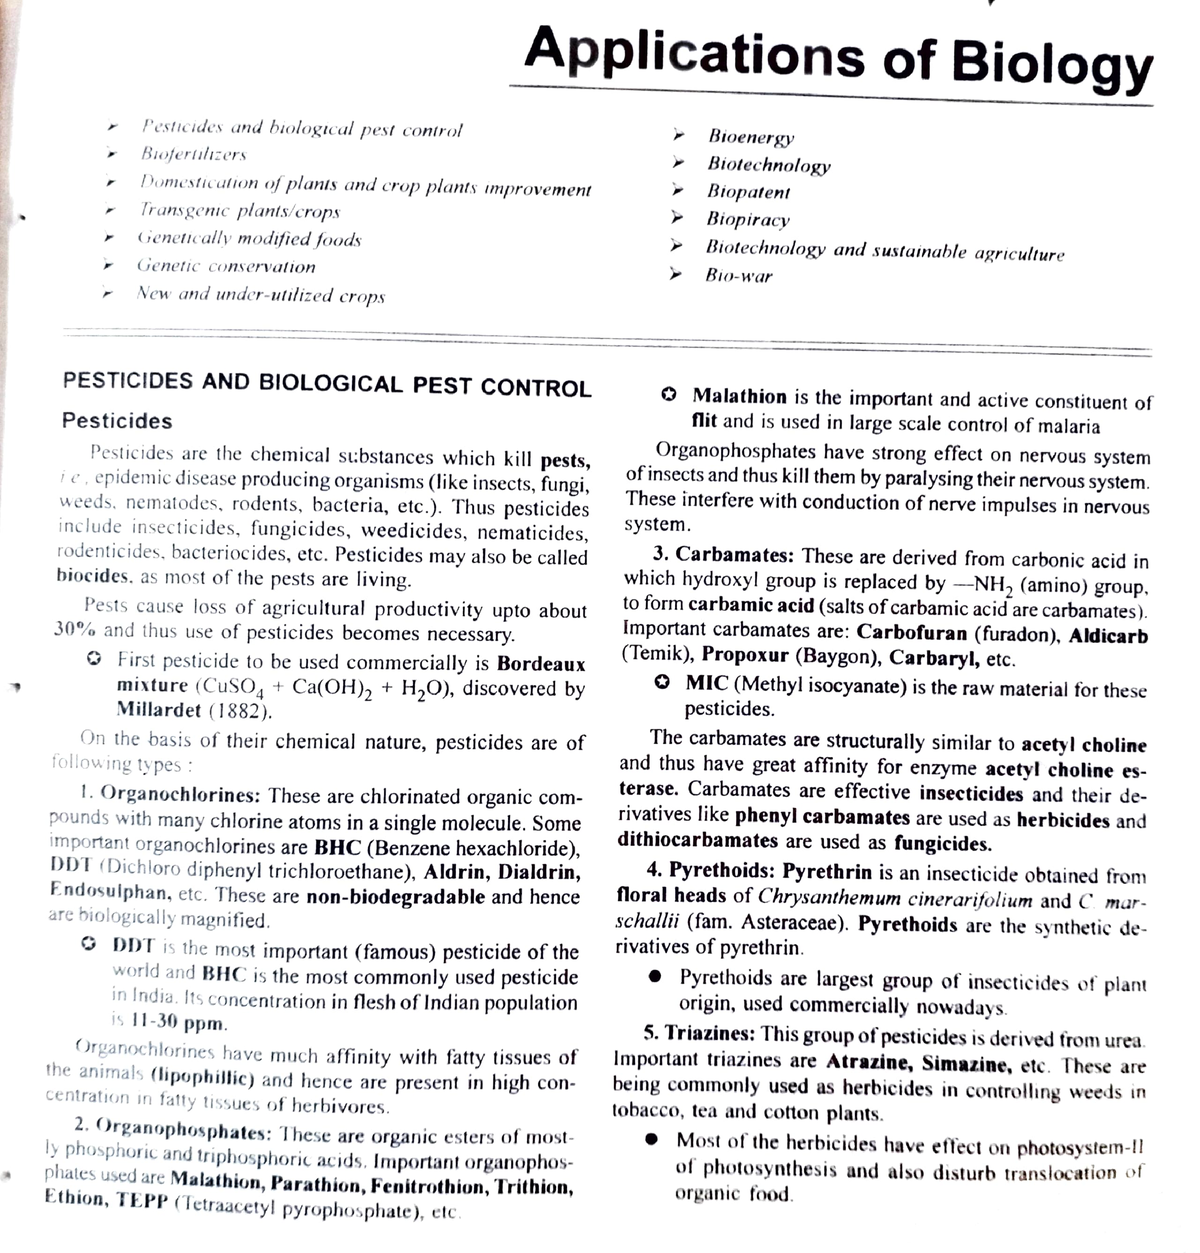 applications of biology in daily life essay